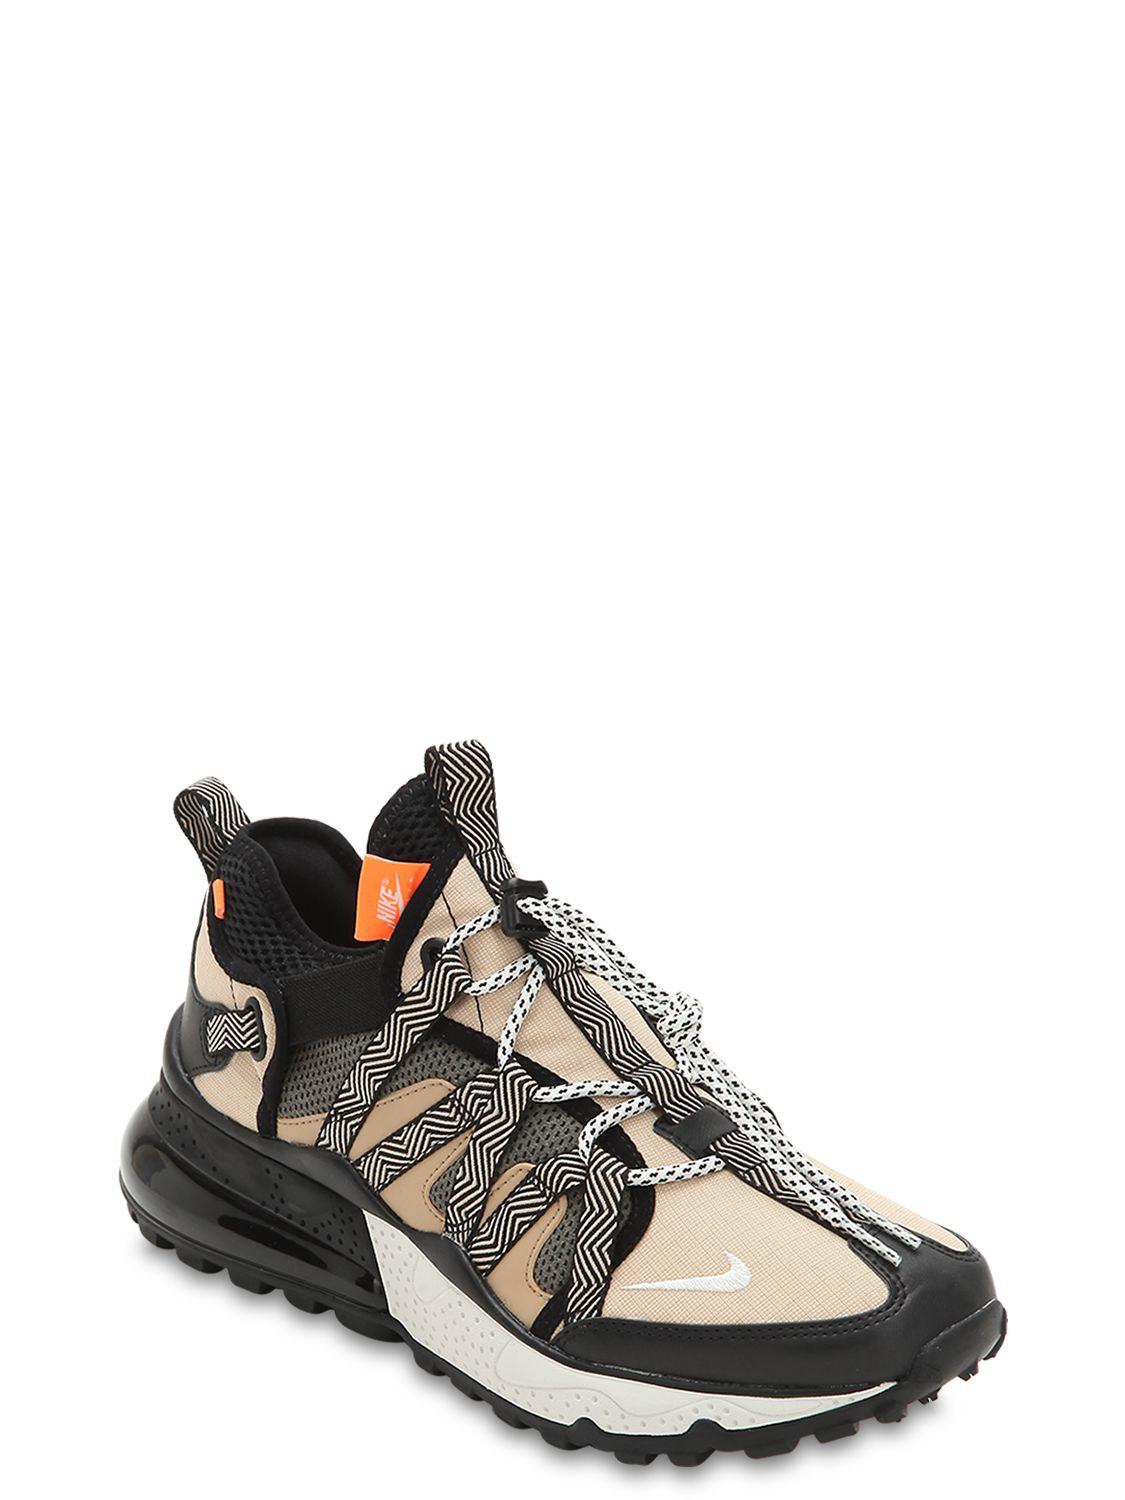 Nike Rubber Air Max 270 Bowfin Trainers in Black/Beige (Black) for Men |  Lyst